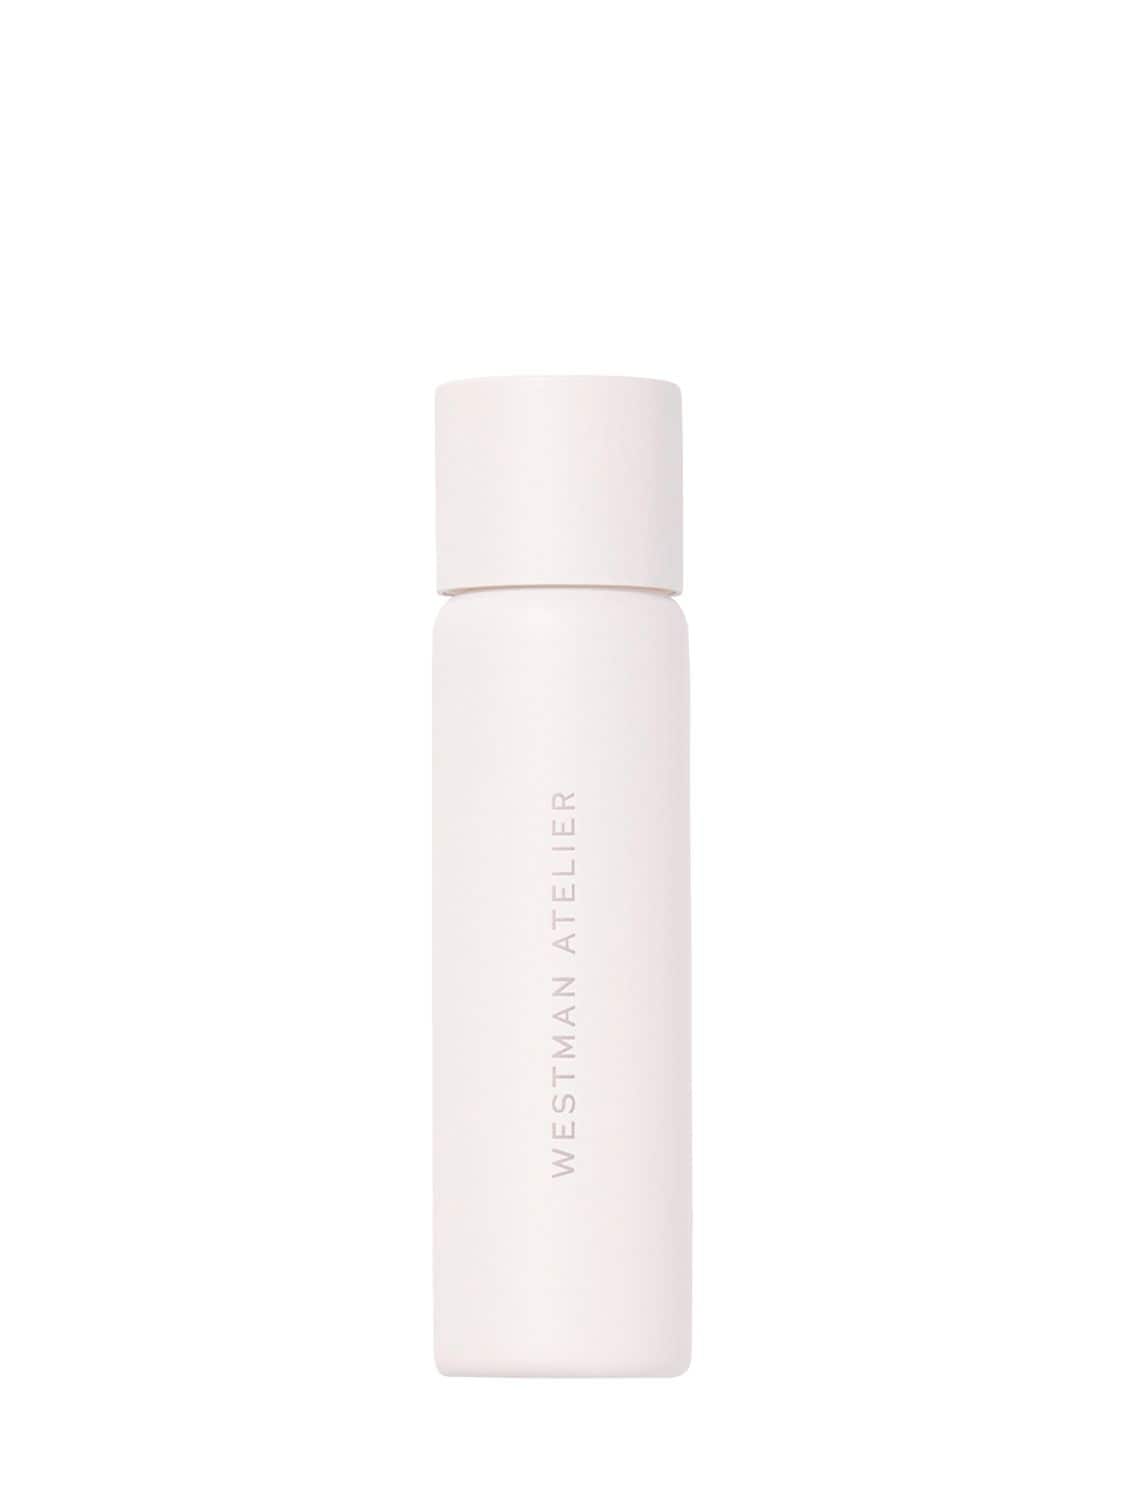 Image of Skin Activator Refill